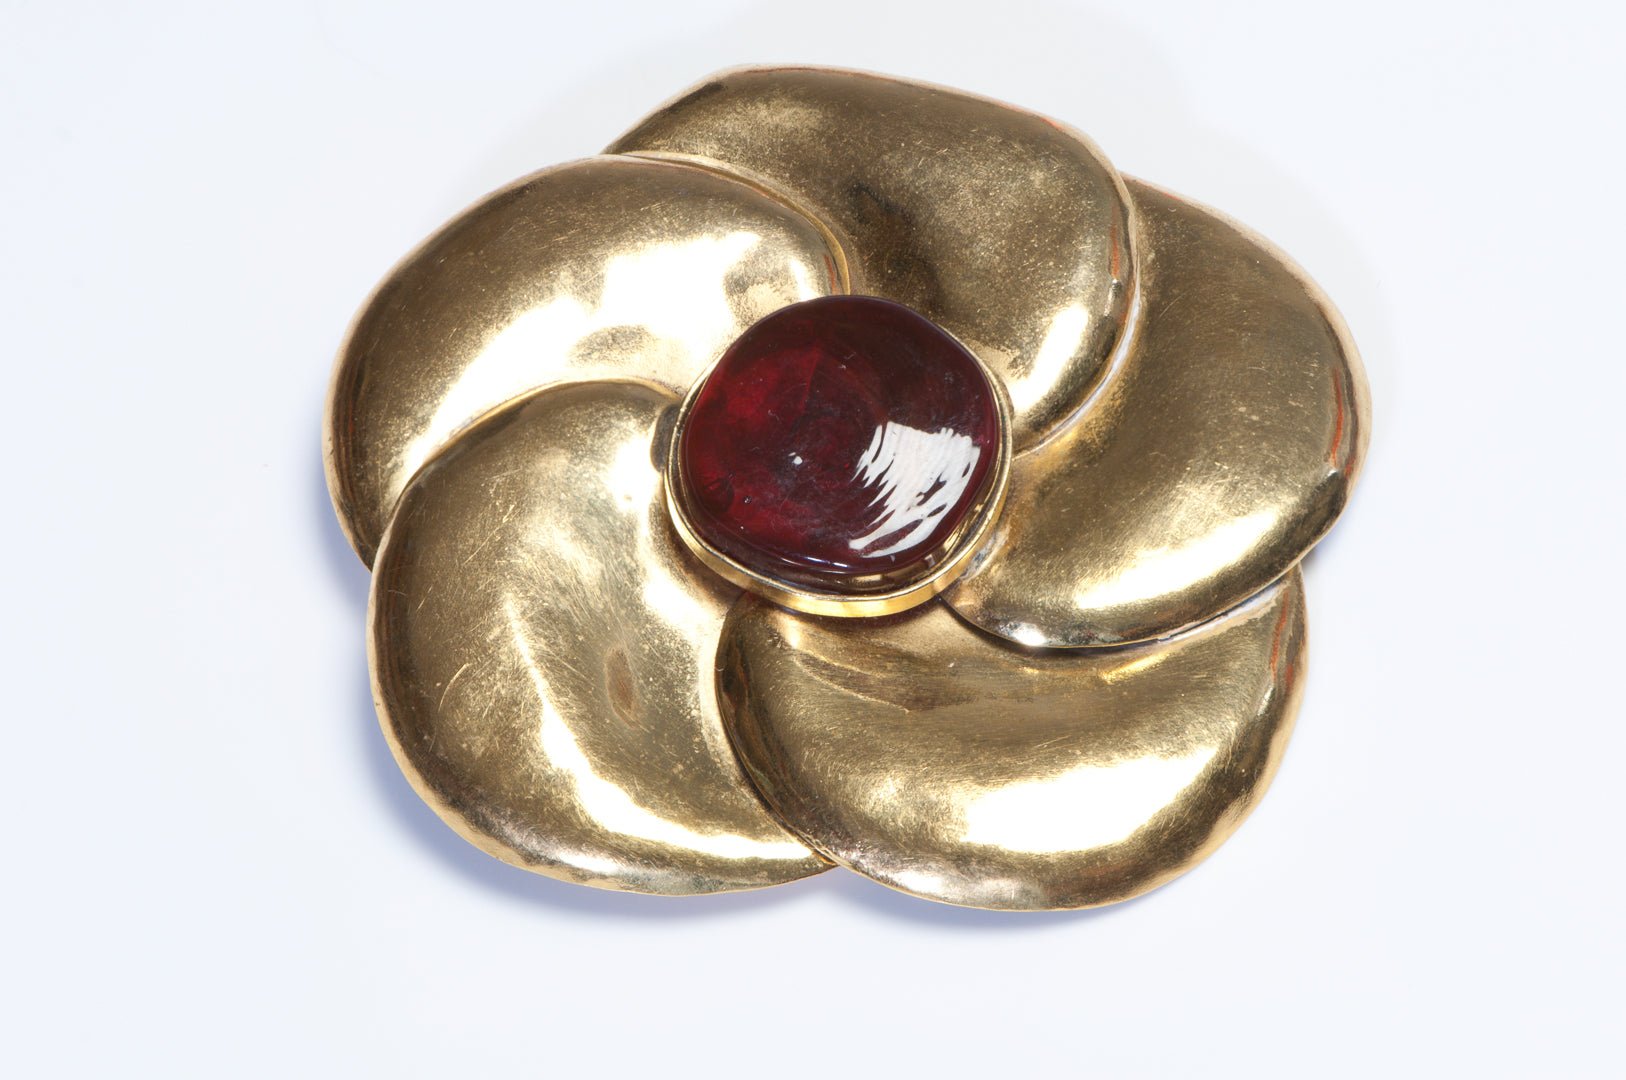 Frances Patiky Stein FPS 1980’s Maison Gripoix Red Glass Camellia Flower Brooch - DSF Antique Jewelry